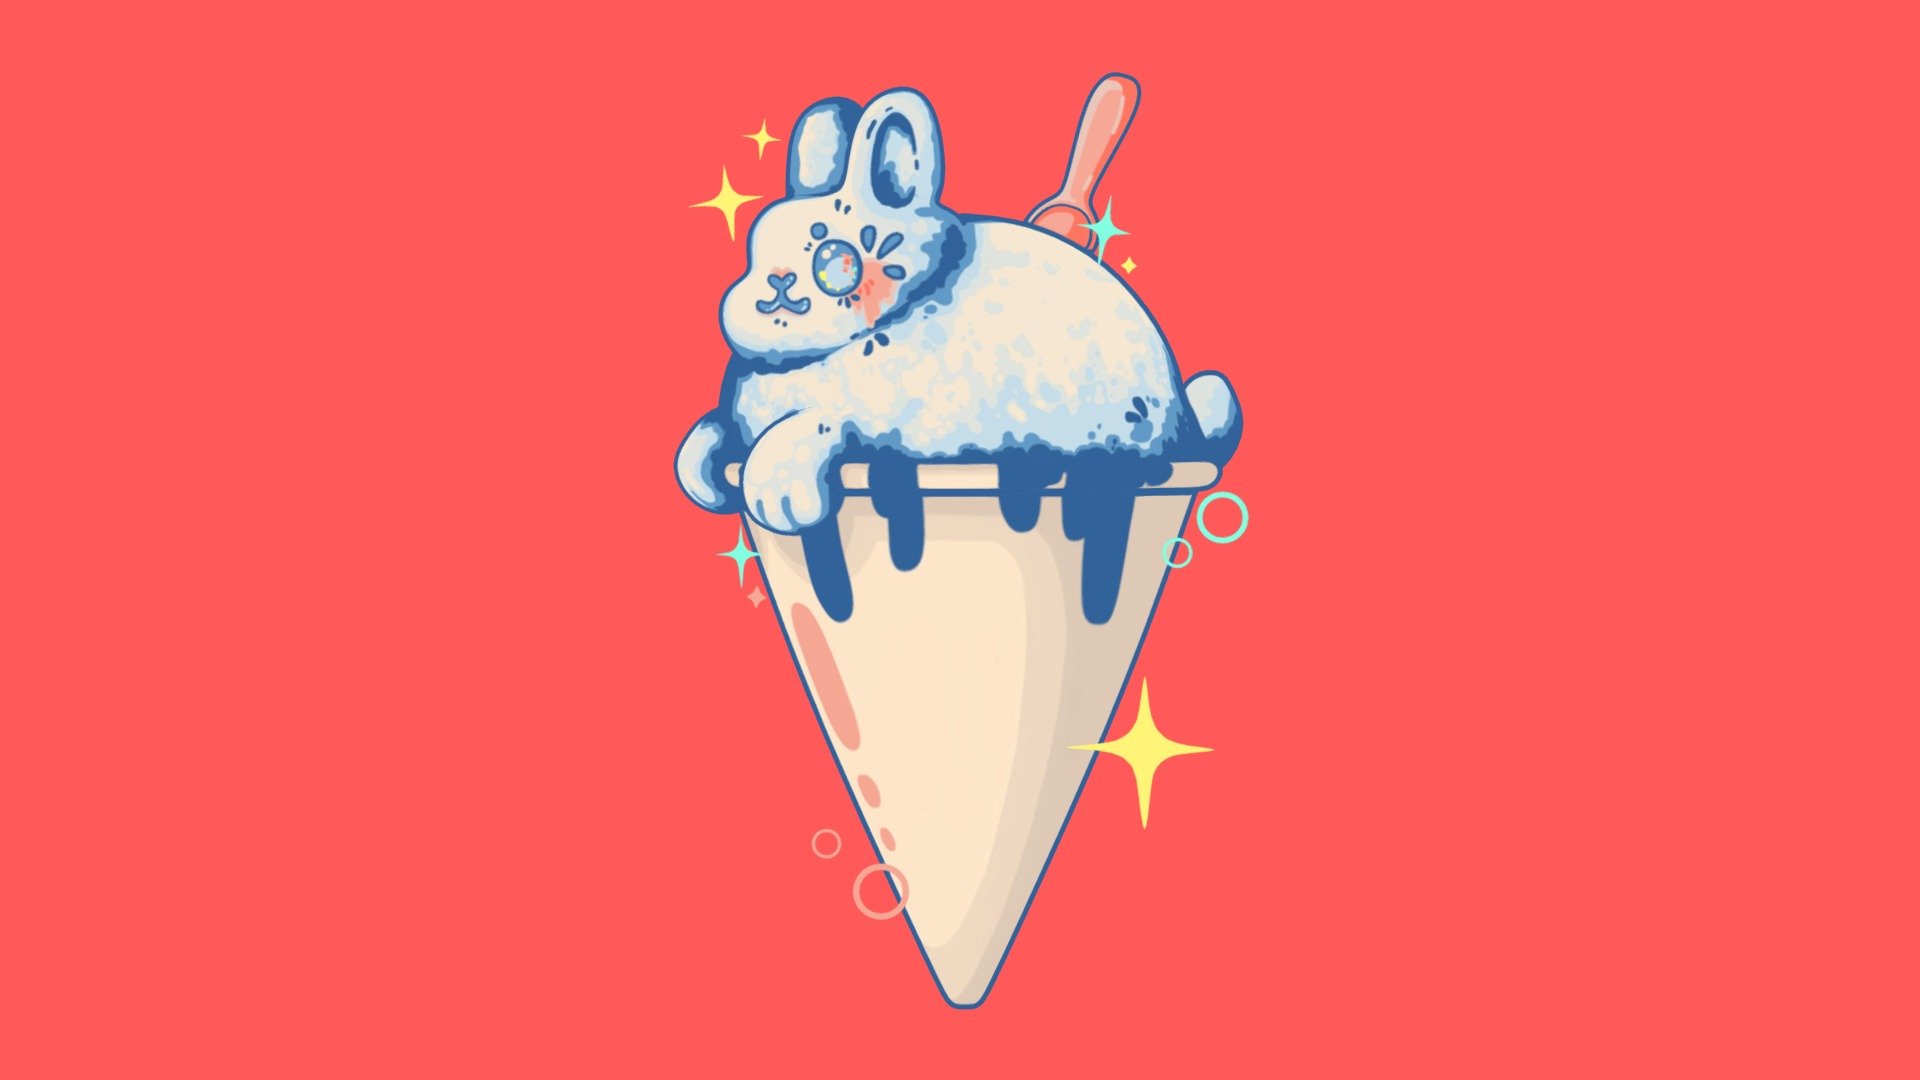 🍧Snow-Bun🍧 - A blue raspberry snow cone bunny

❄️For the Sketchfab Weekly Challenge prompt &ldquo;Snow